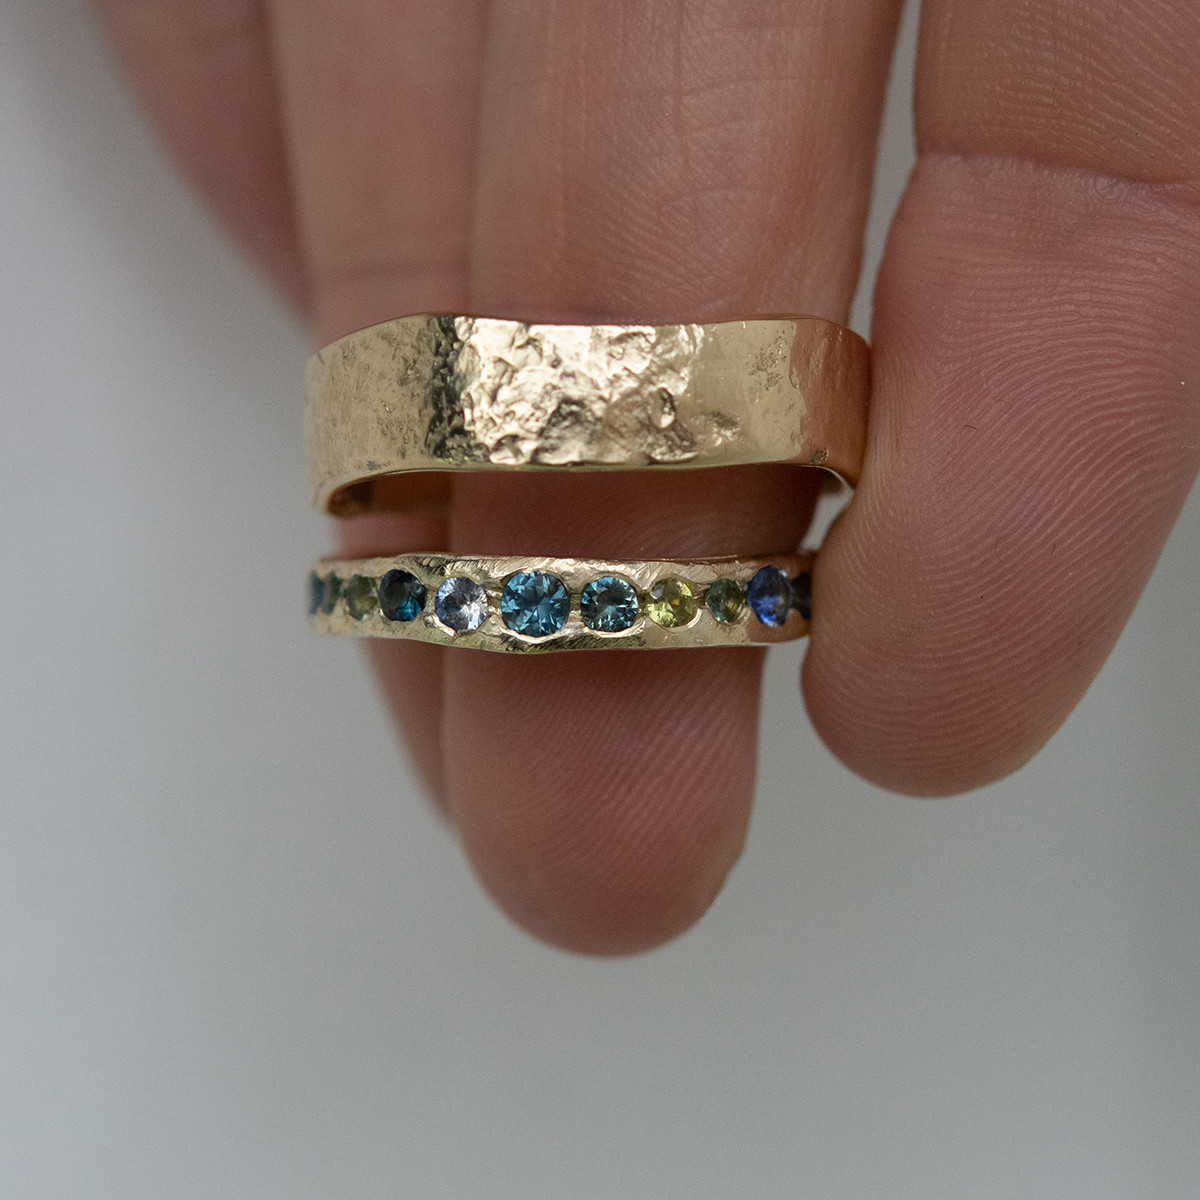 Emily Nixon: Stone Wide 9ct Gold Ring, tomfoolery